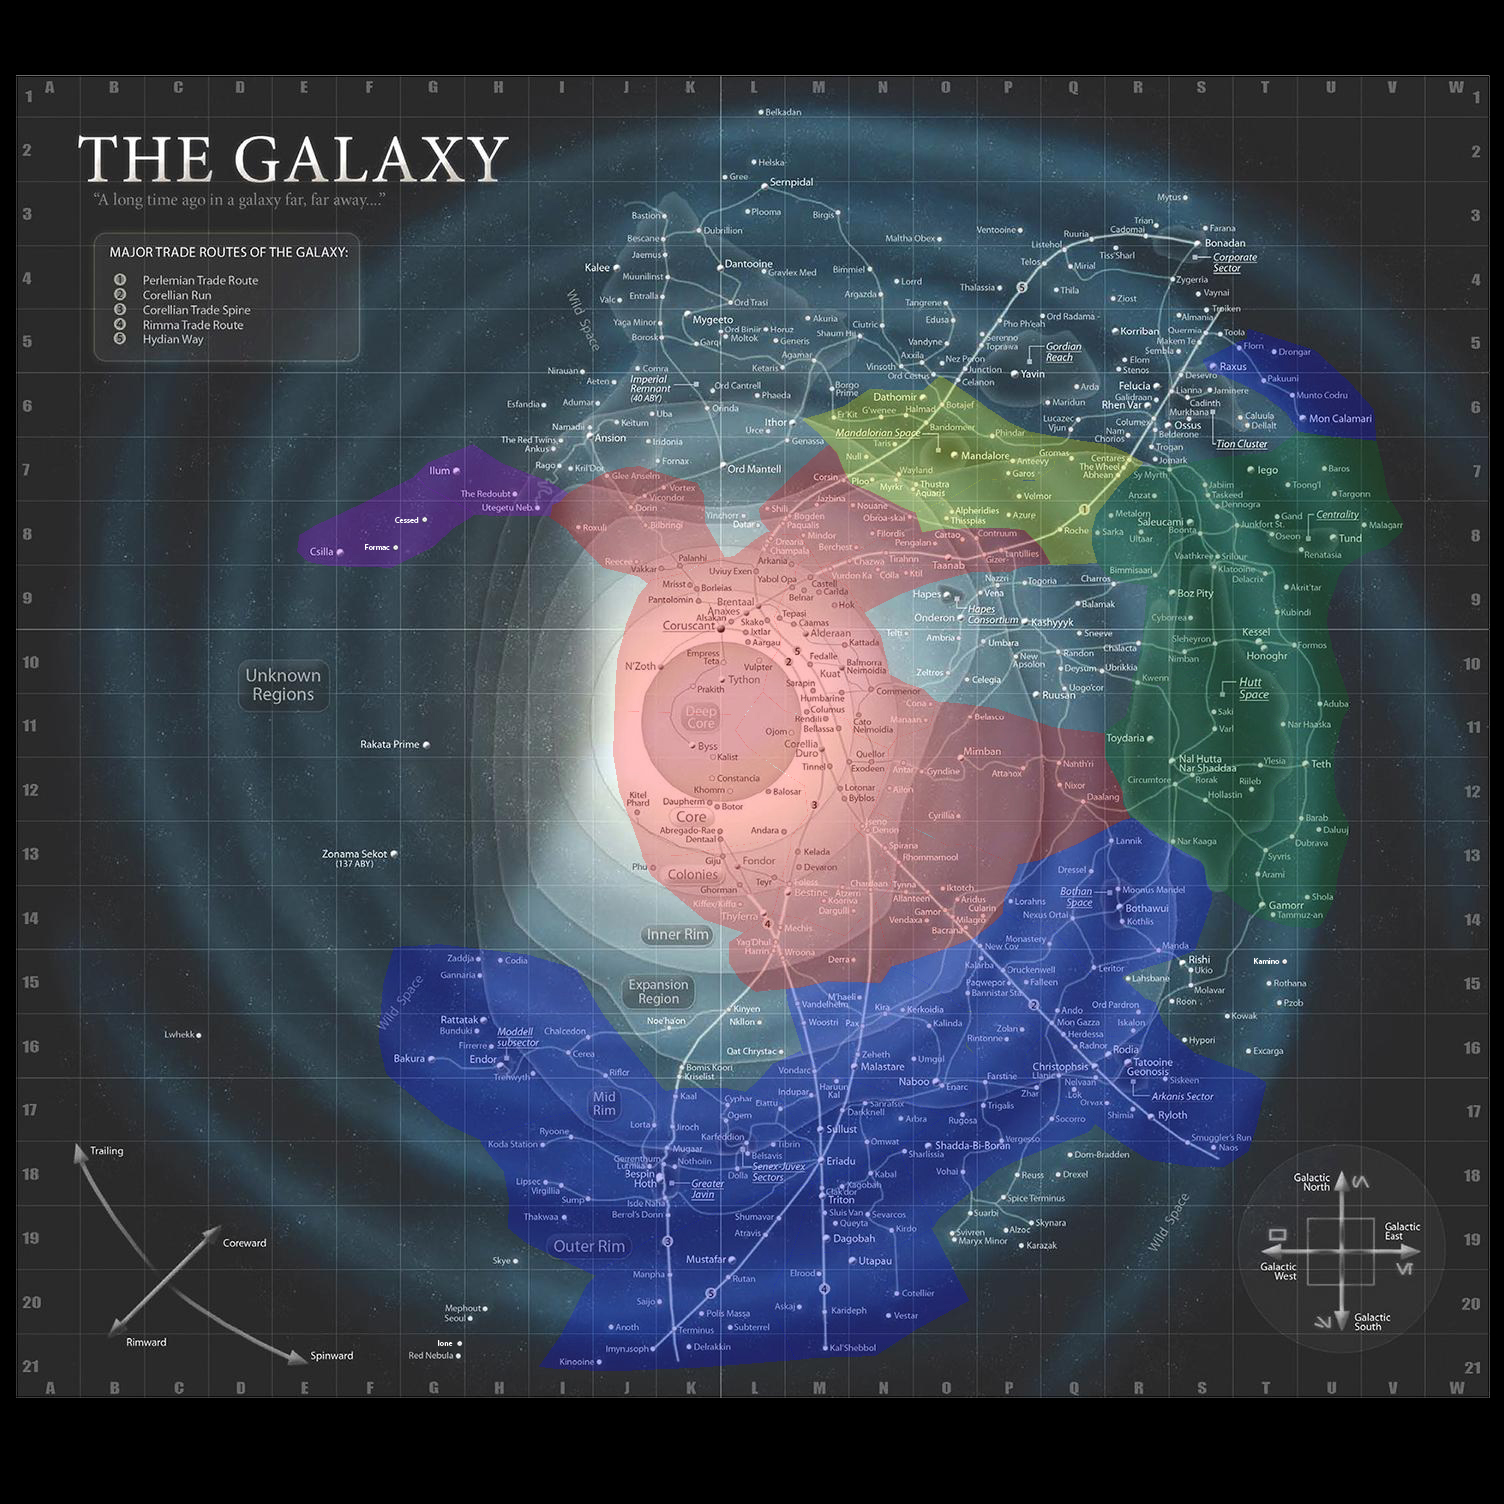 A Galaxy Divided 3/4/15 image - Star Wars - Roleplay Group - Mod DB1504 x 1504